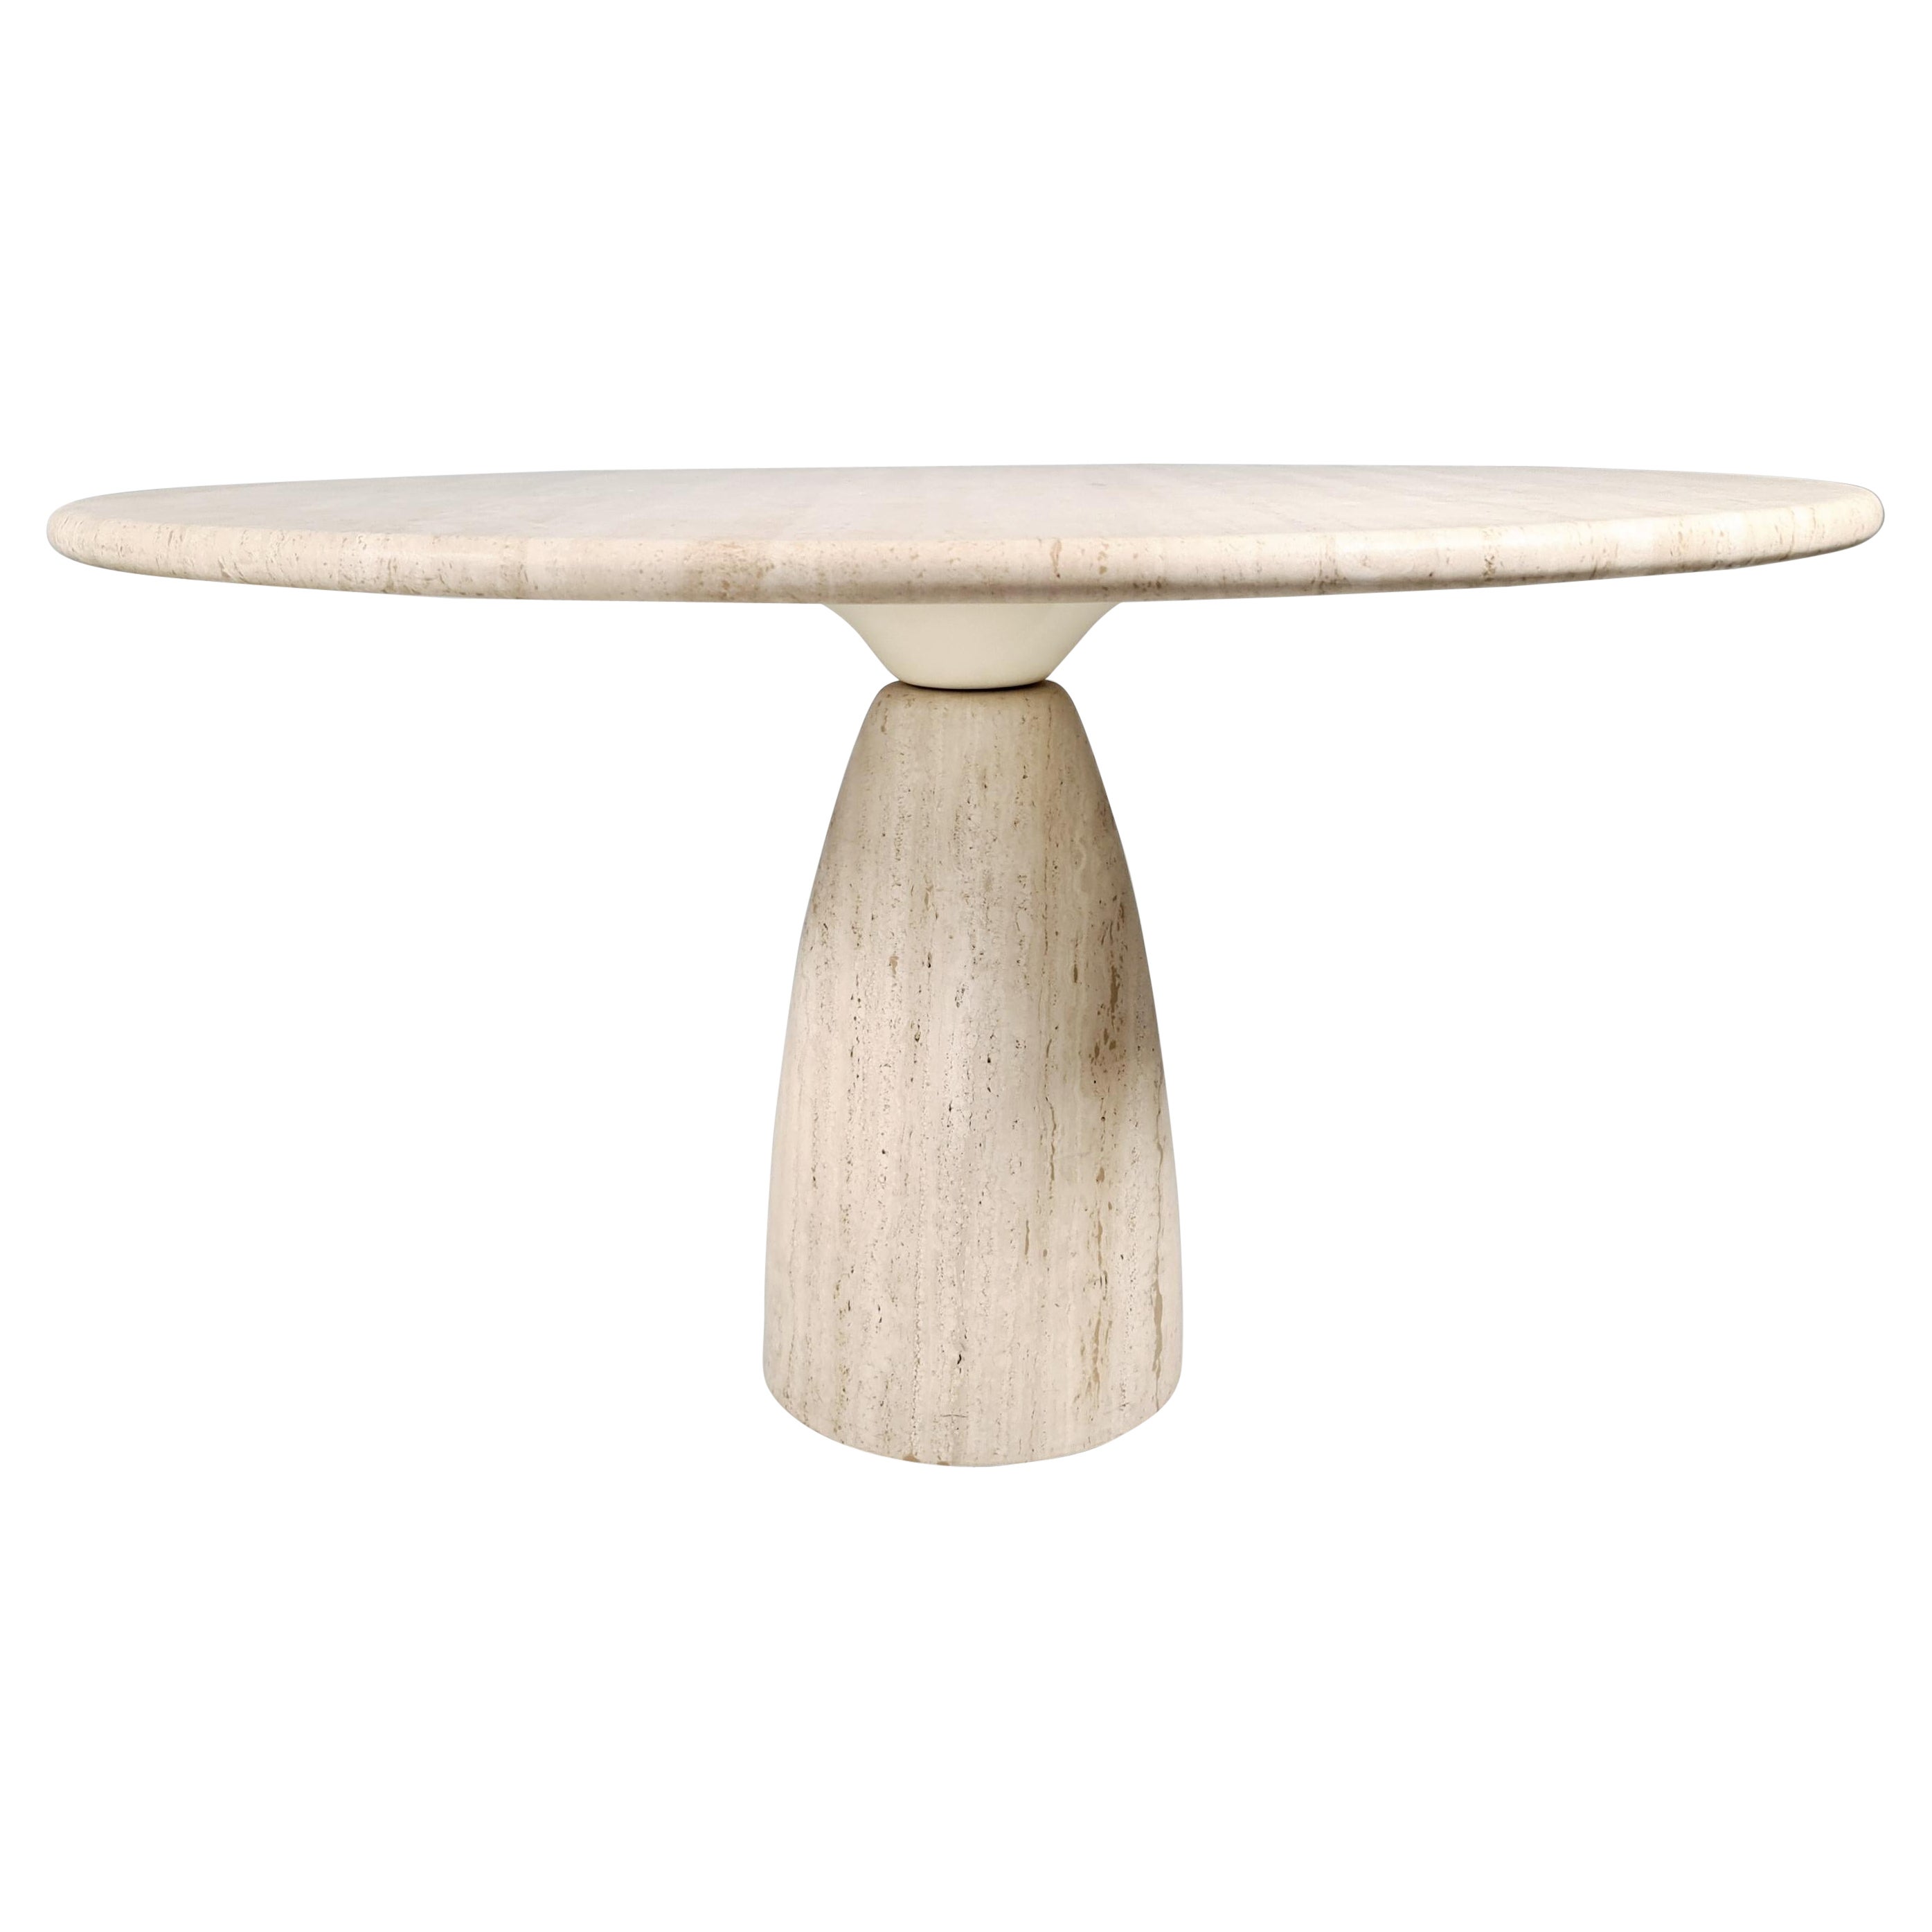 Finale 1790 Travertine Dining Table by Peter Draenert, 1970s